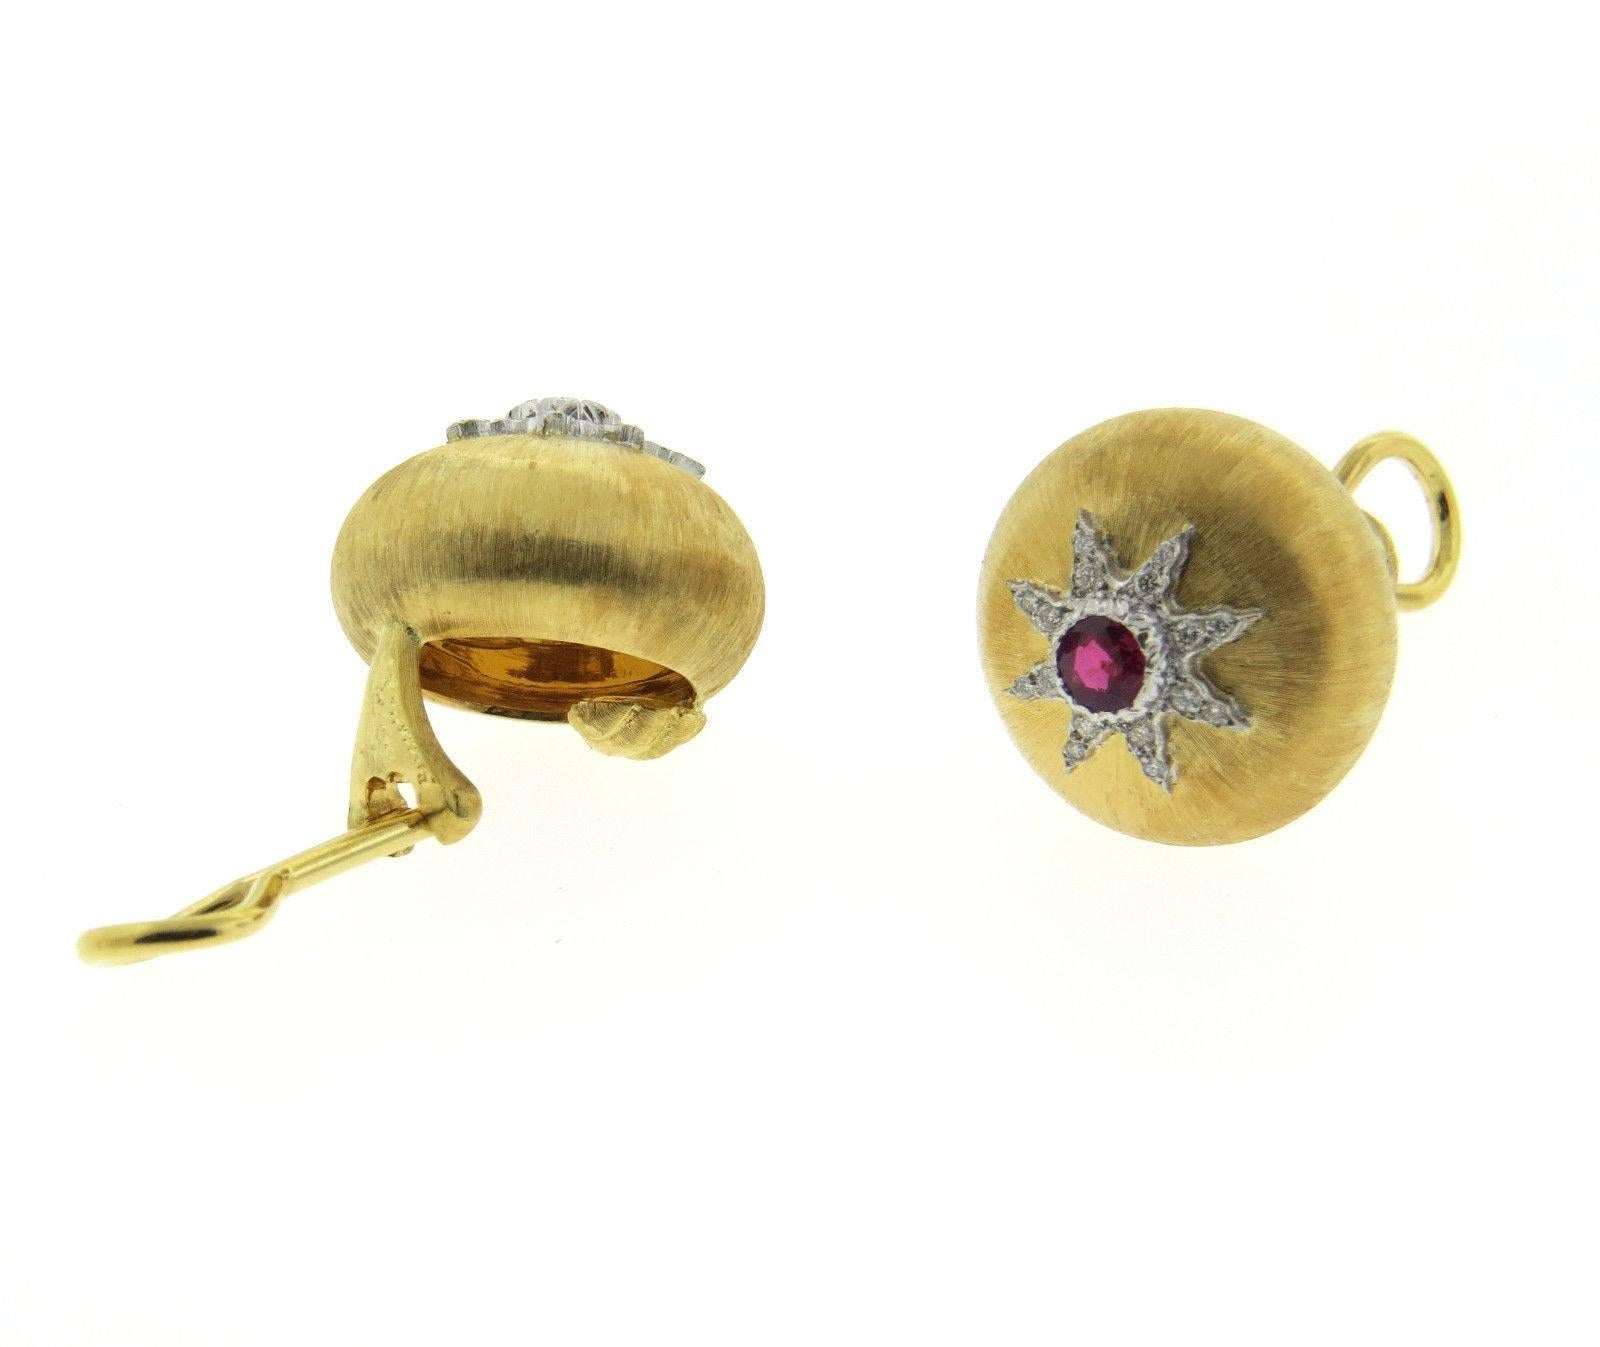 A pair of 18K yellow and white gold earrings set with rubies.  Crafted by Buccellati, the earrings measure 17mm in diameter and weigh 15.5 grams.  Marked: Buccellati, Italy, 18k.